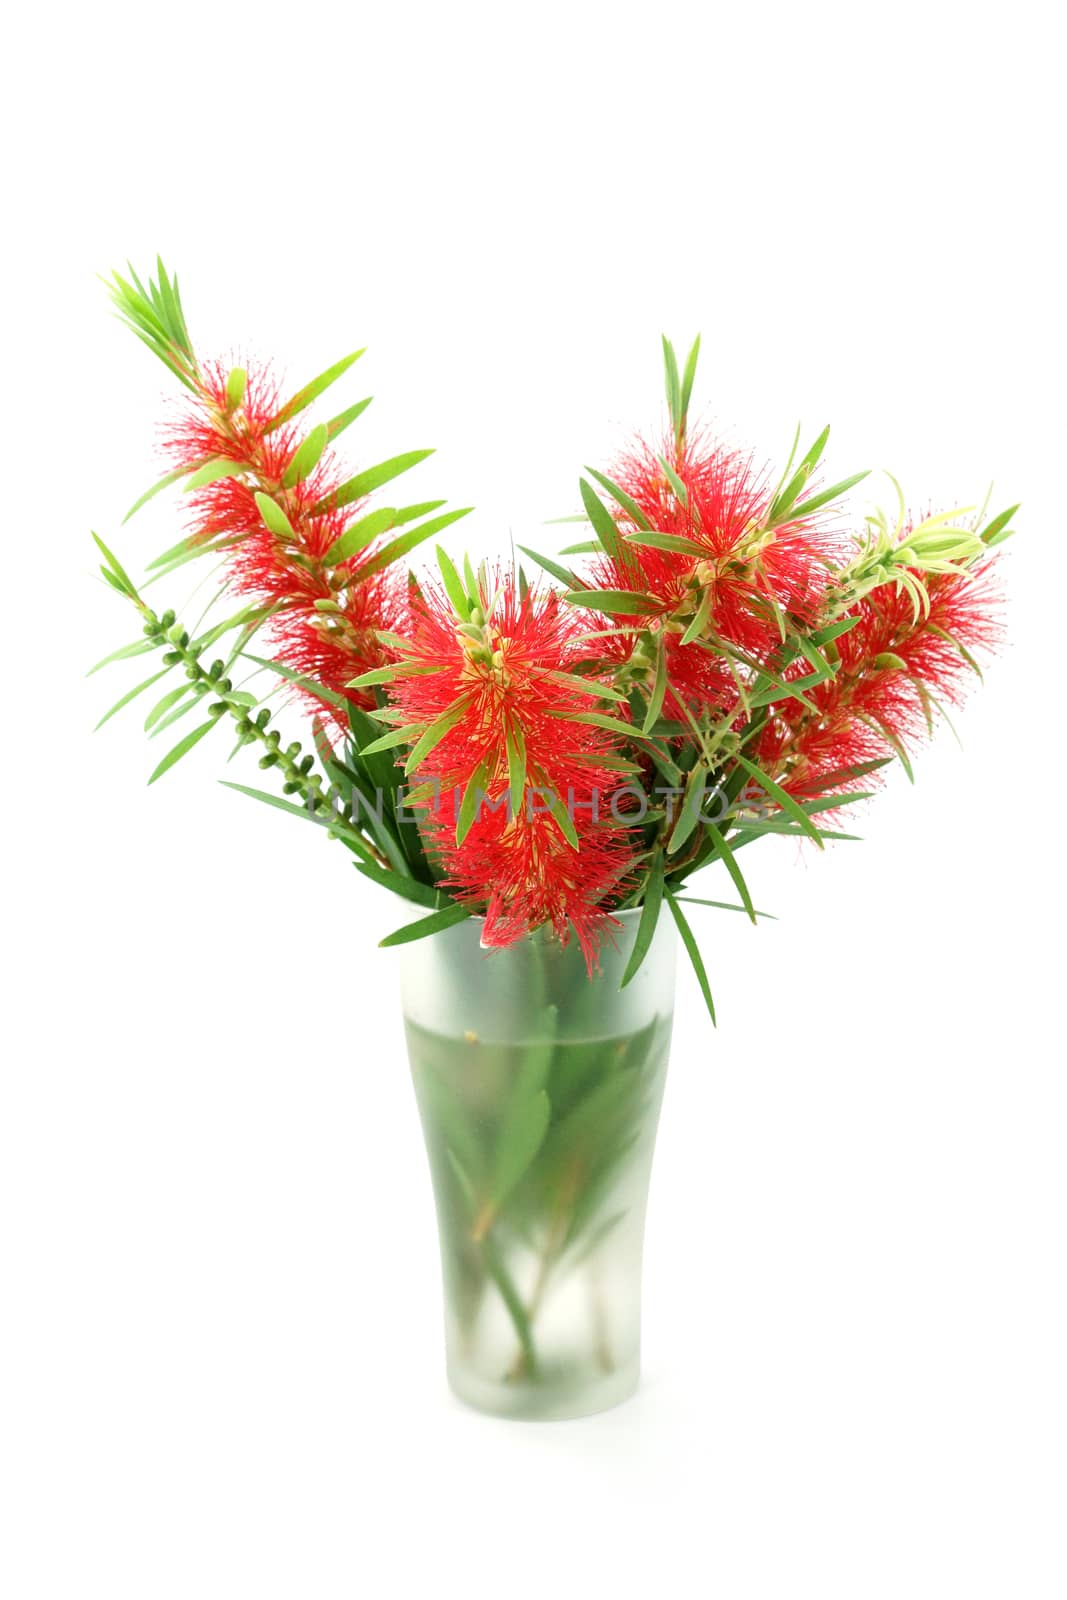 Red bottle brush flower isolated on white background, Scientific by Noppharat_th